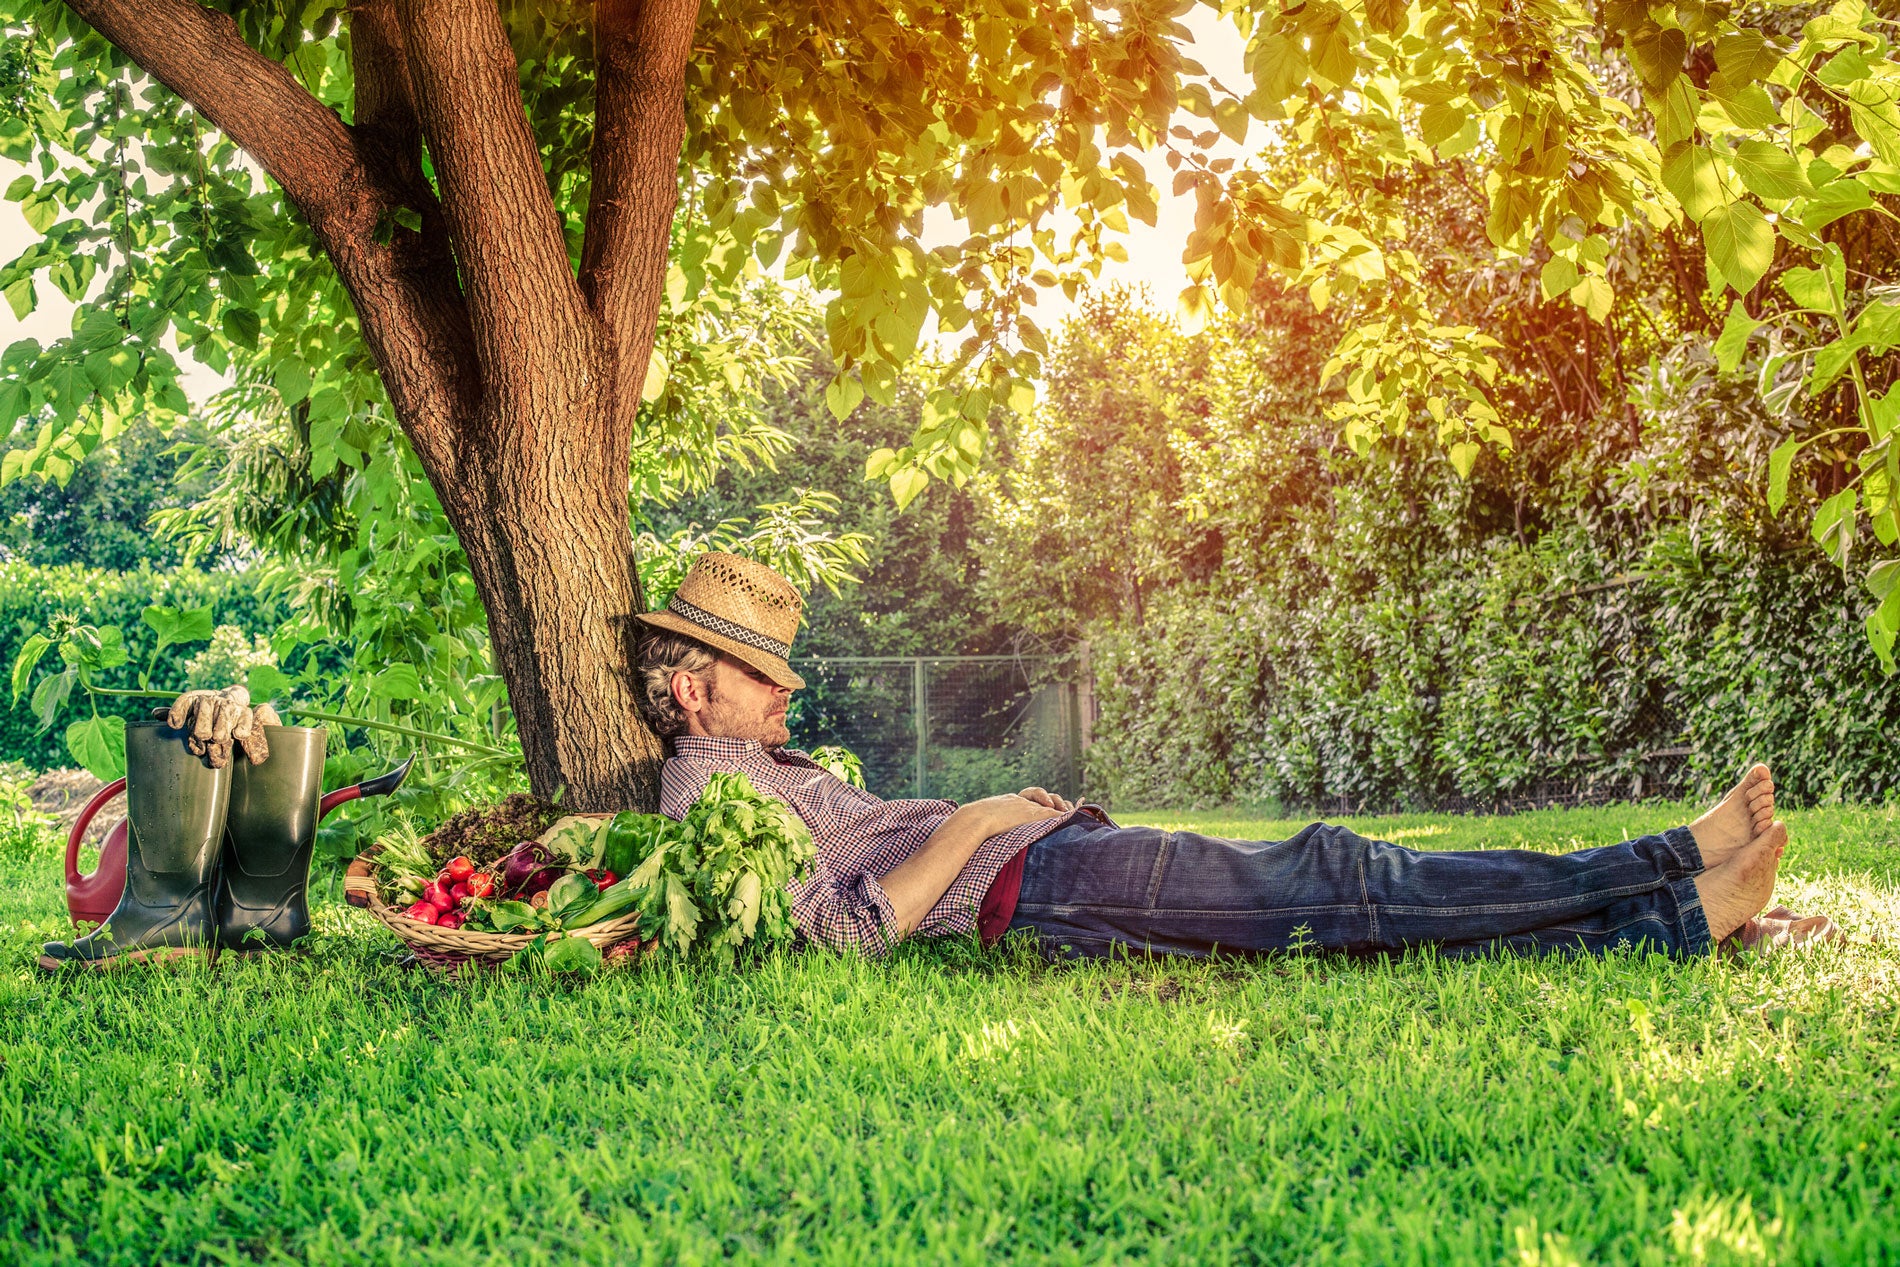 The Lazy Gardener - 8 Simple Tips to Make Gardening a Breeze